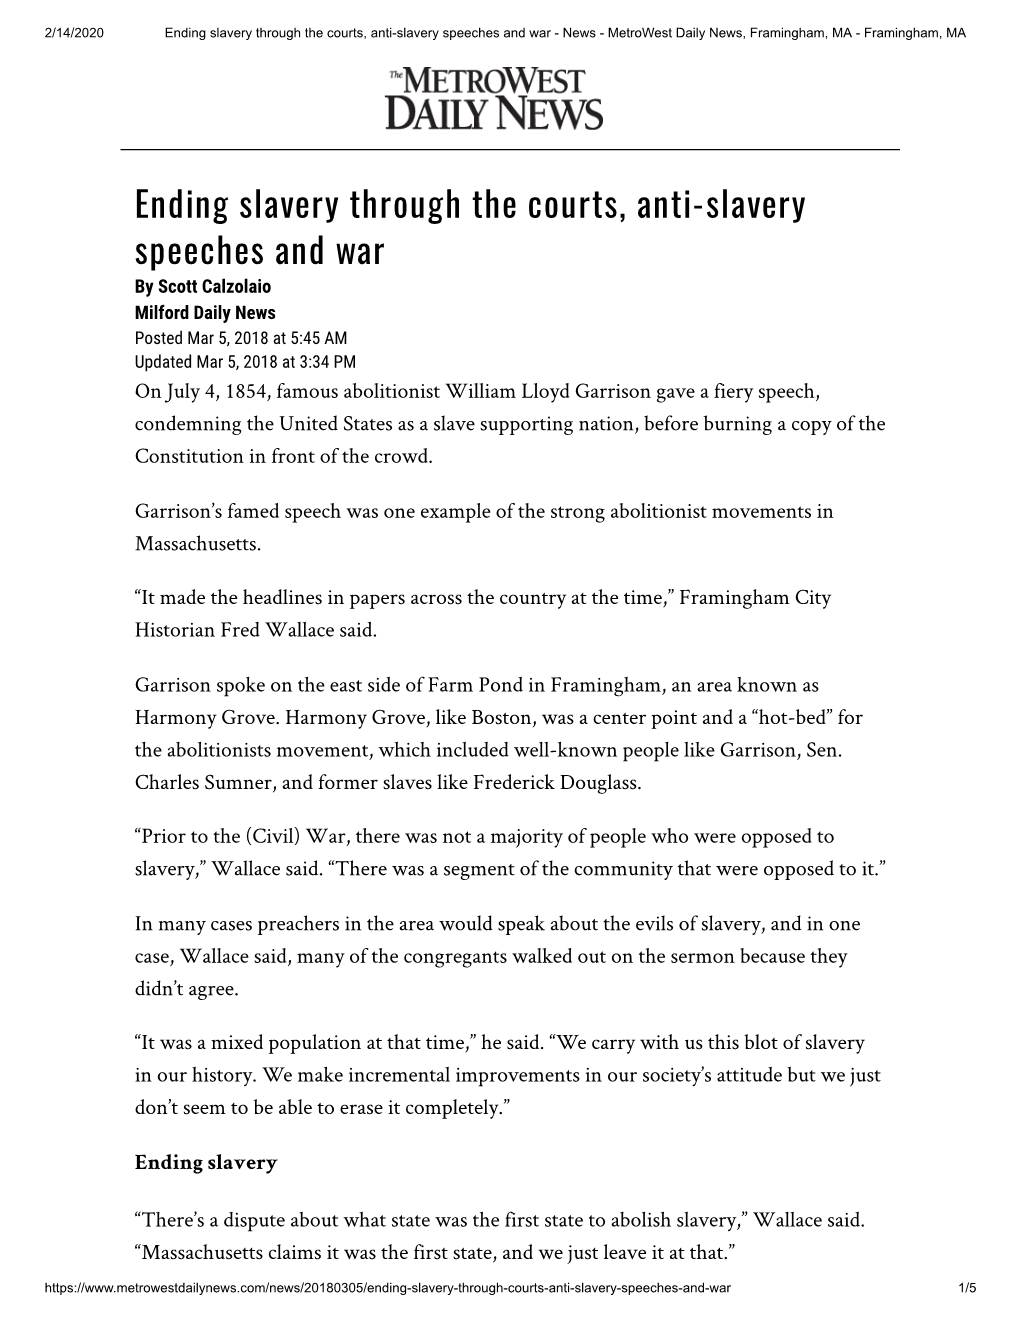 Ending Slavery Through the Courts, Anti-Slavery Speeches and War - News - Metrowest Daily News, Framingham, MA - Framingham, MA